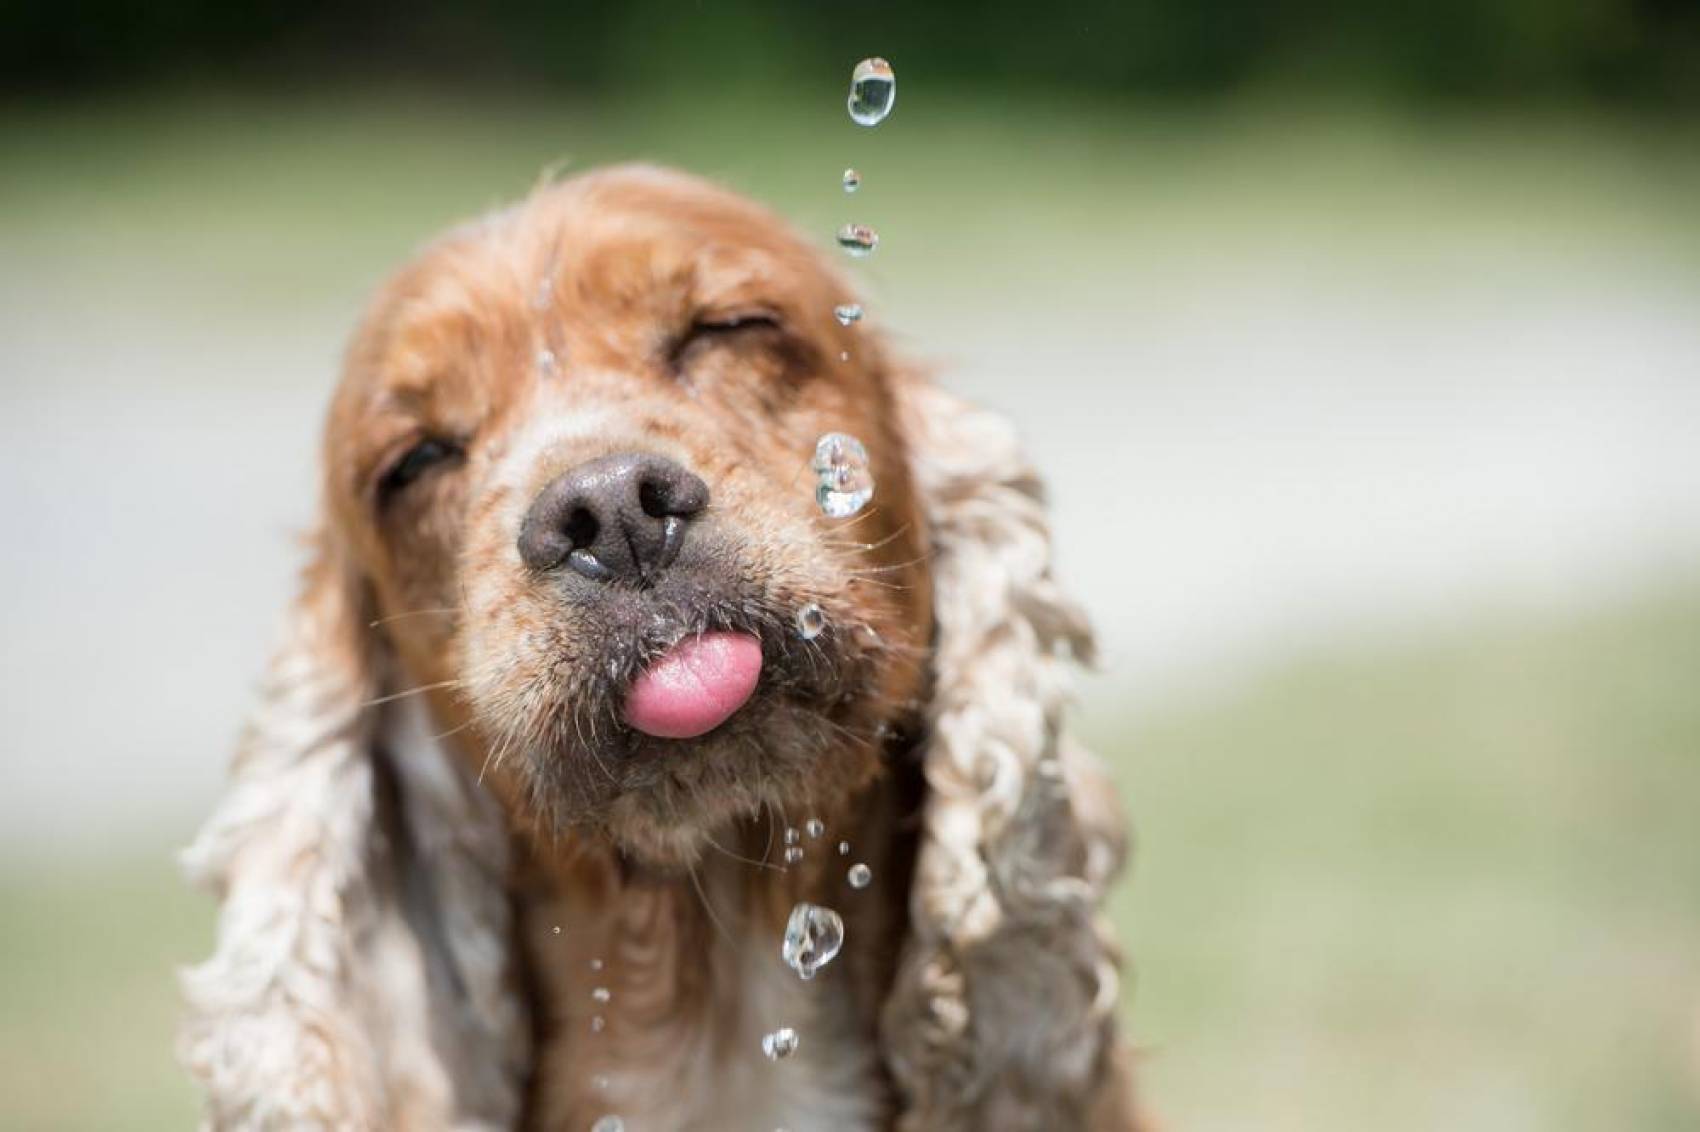 Why Does My Cocker Spaniel Drink So Much Water?